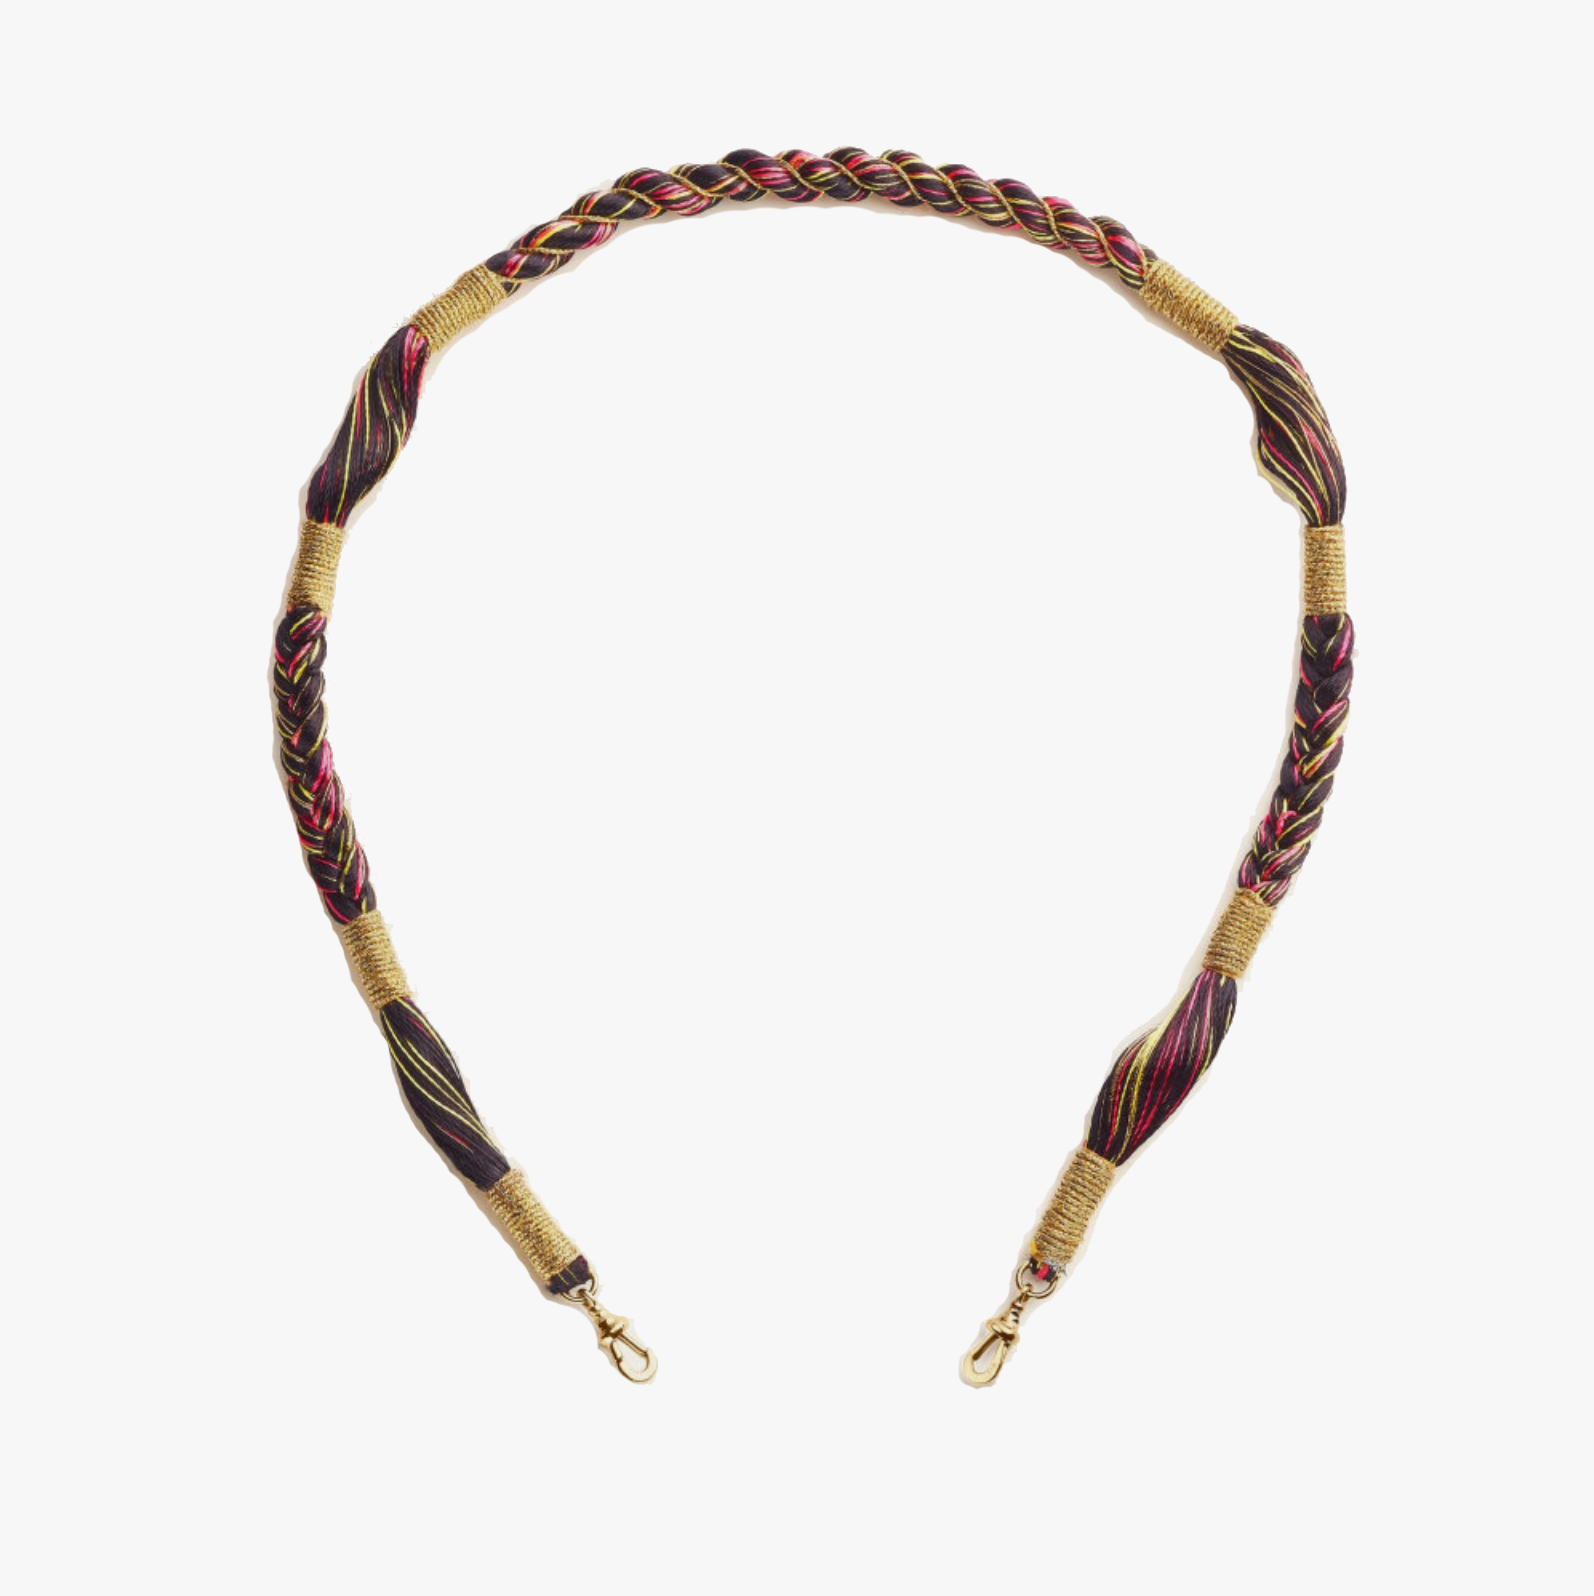 Black short Rathi cord with gold and pink accents